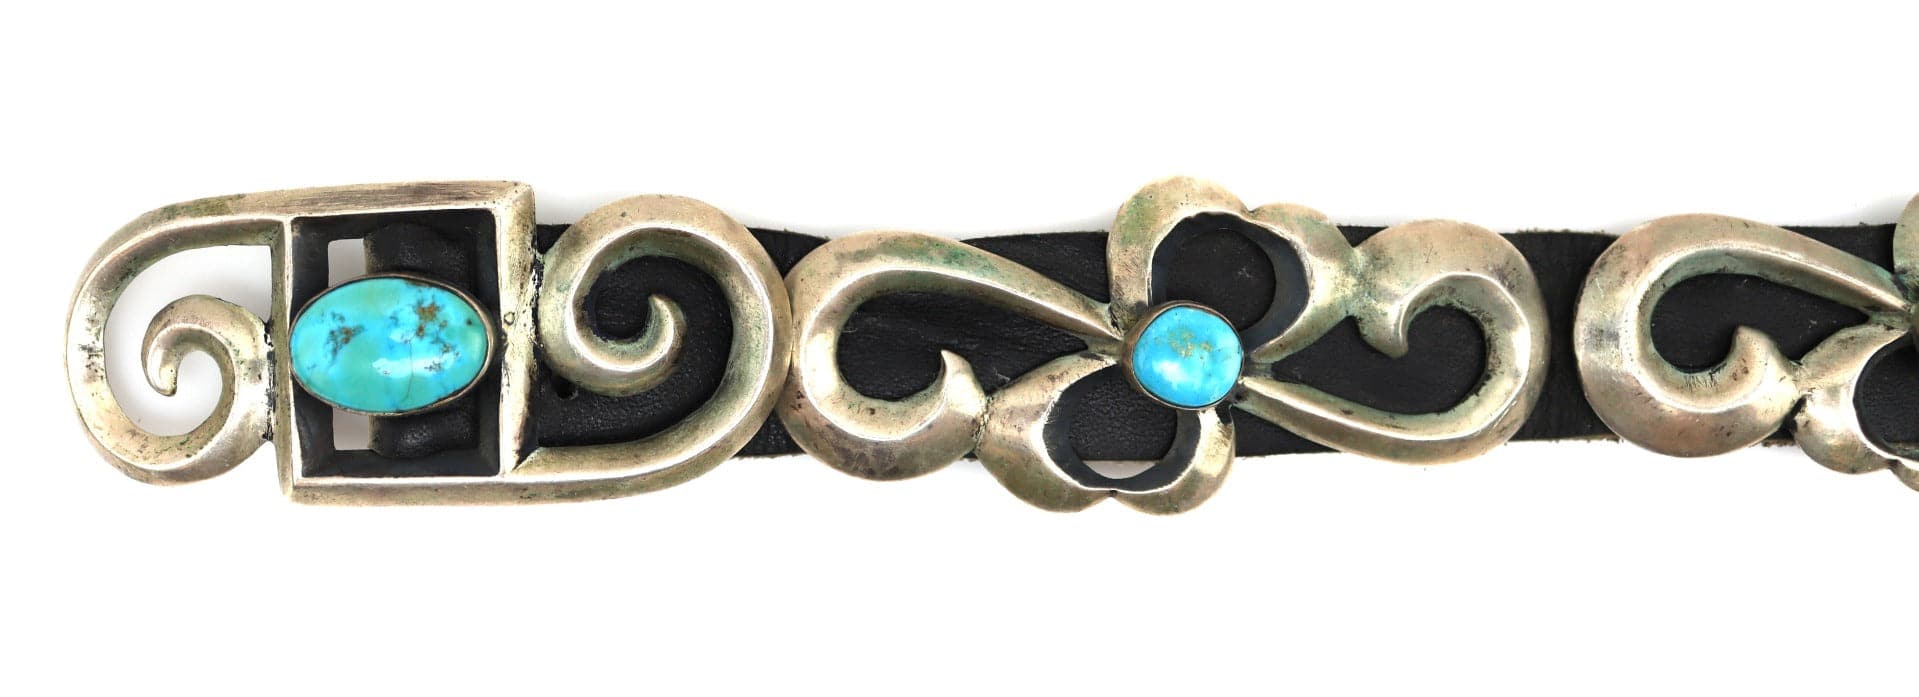 "Toddy" - Navajo Turquoise, Silver Sandcast, and Leather Belt c. 1950s, 32" length (J92243-0421-018)1